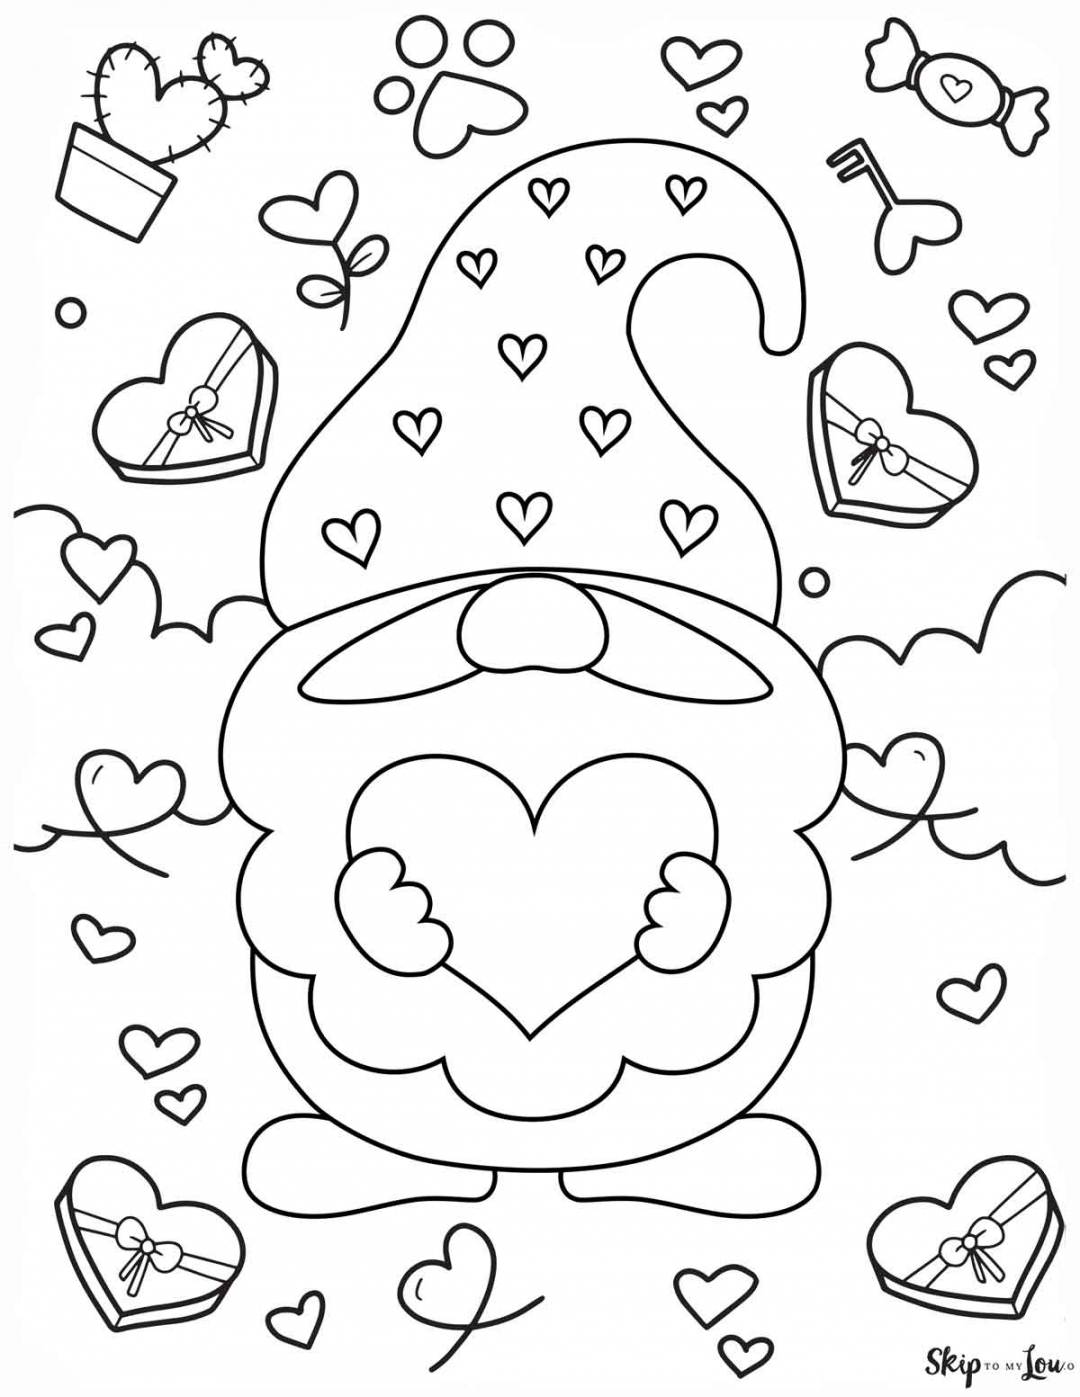 Free Printable Cute Valentine Coloring Pages - Printable - The BEST free Valentines Day Coloring Pages  Skip To My Lou